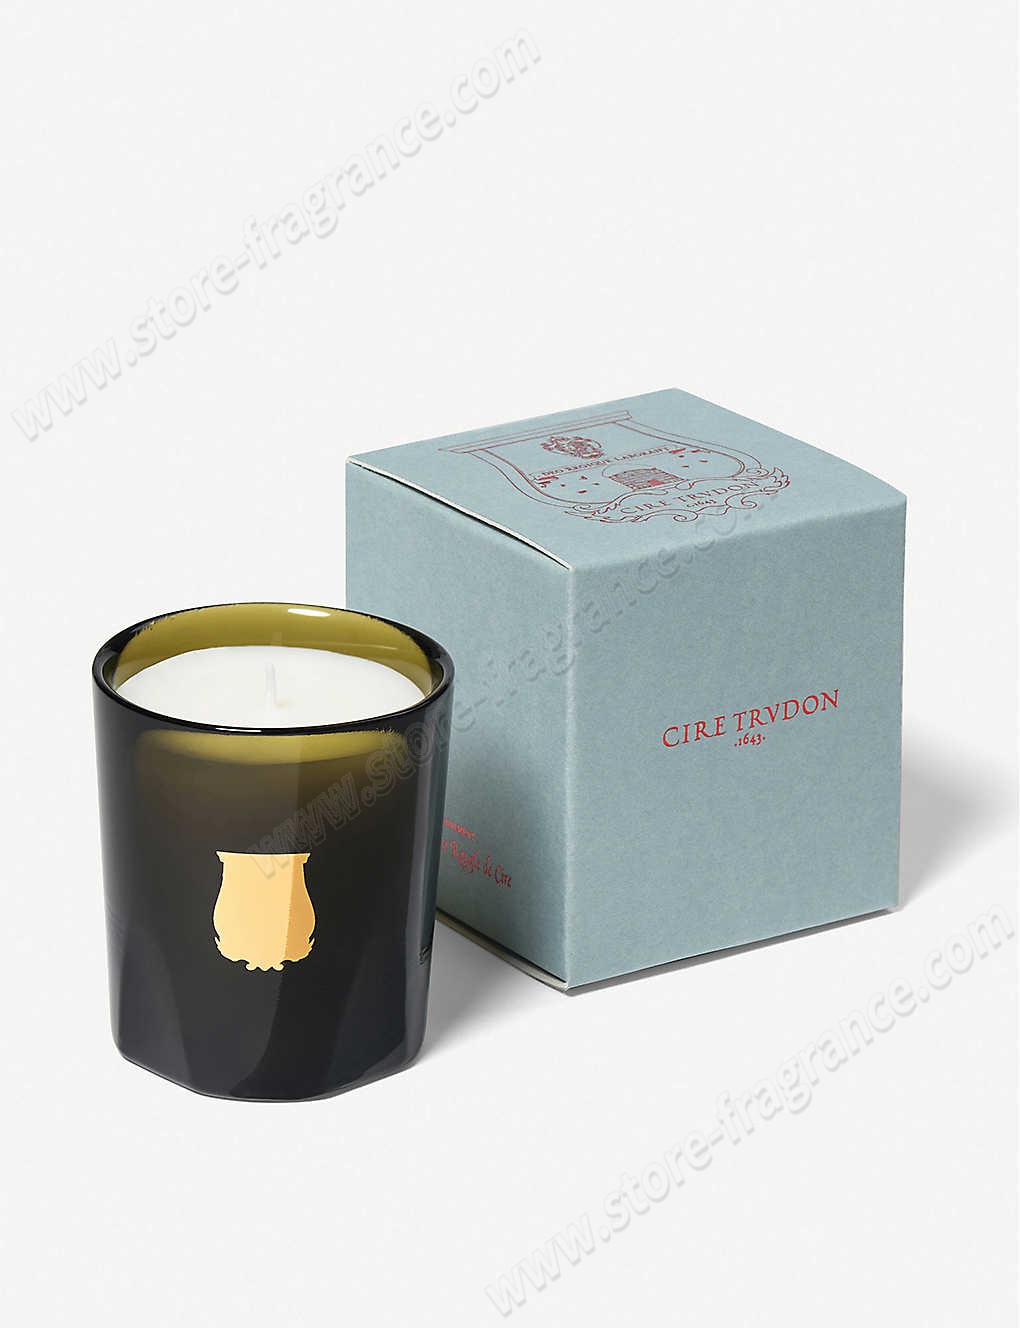 CIRE TRUDON/Abd El Kader scented candle 70g ✿ Discount Store - -1